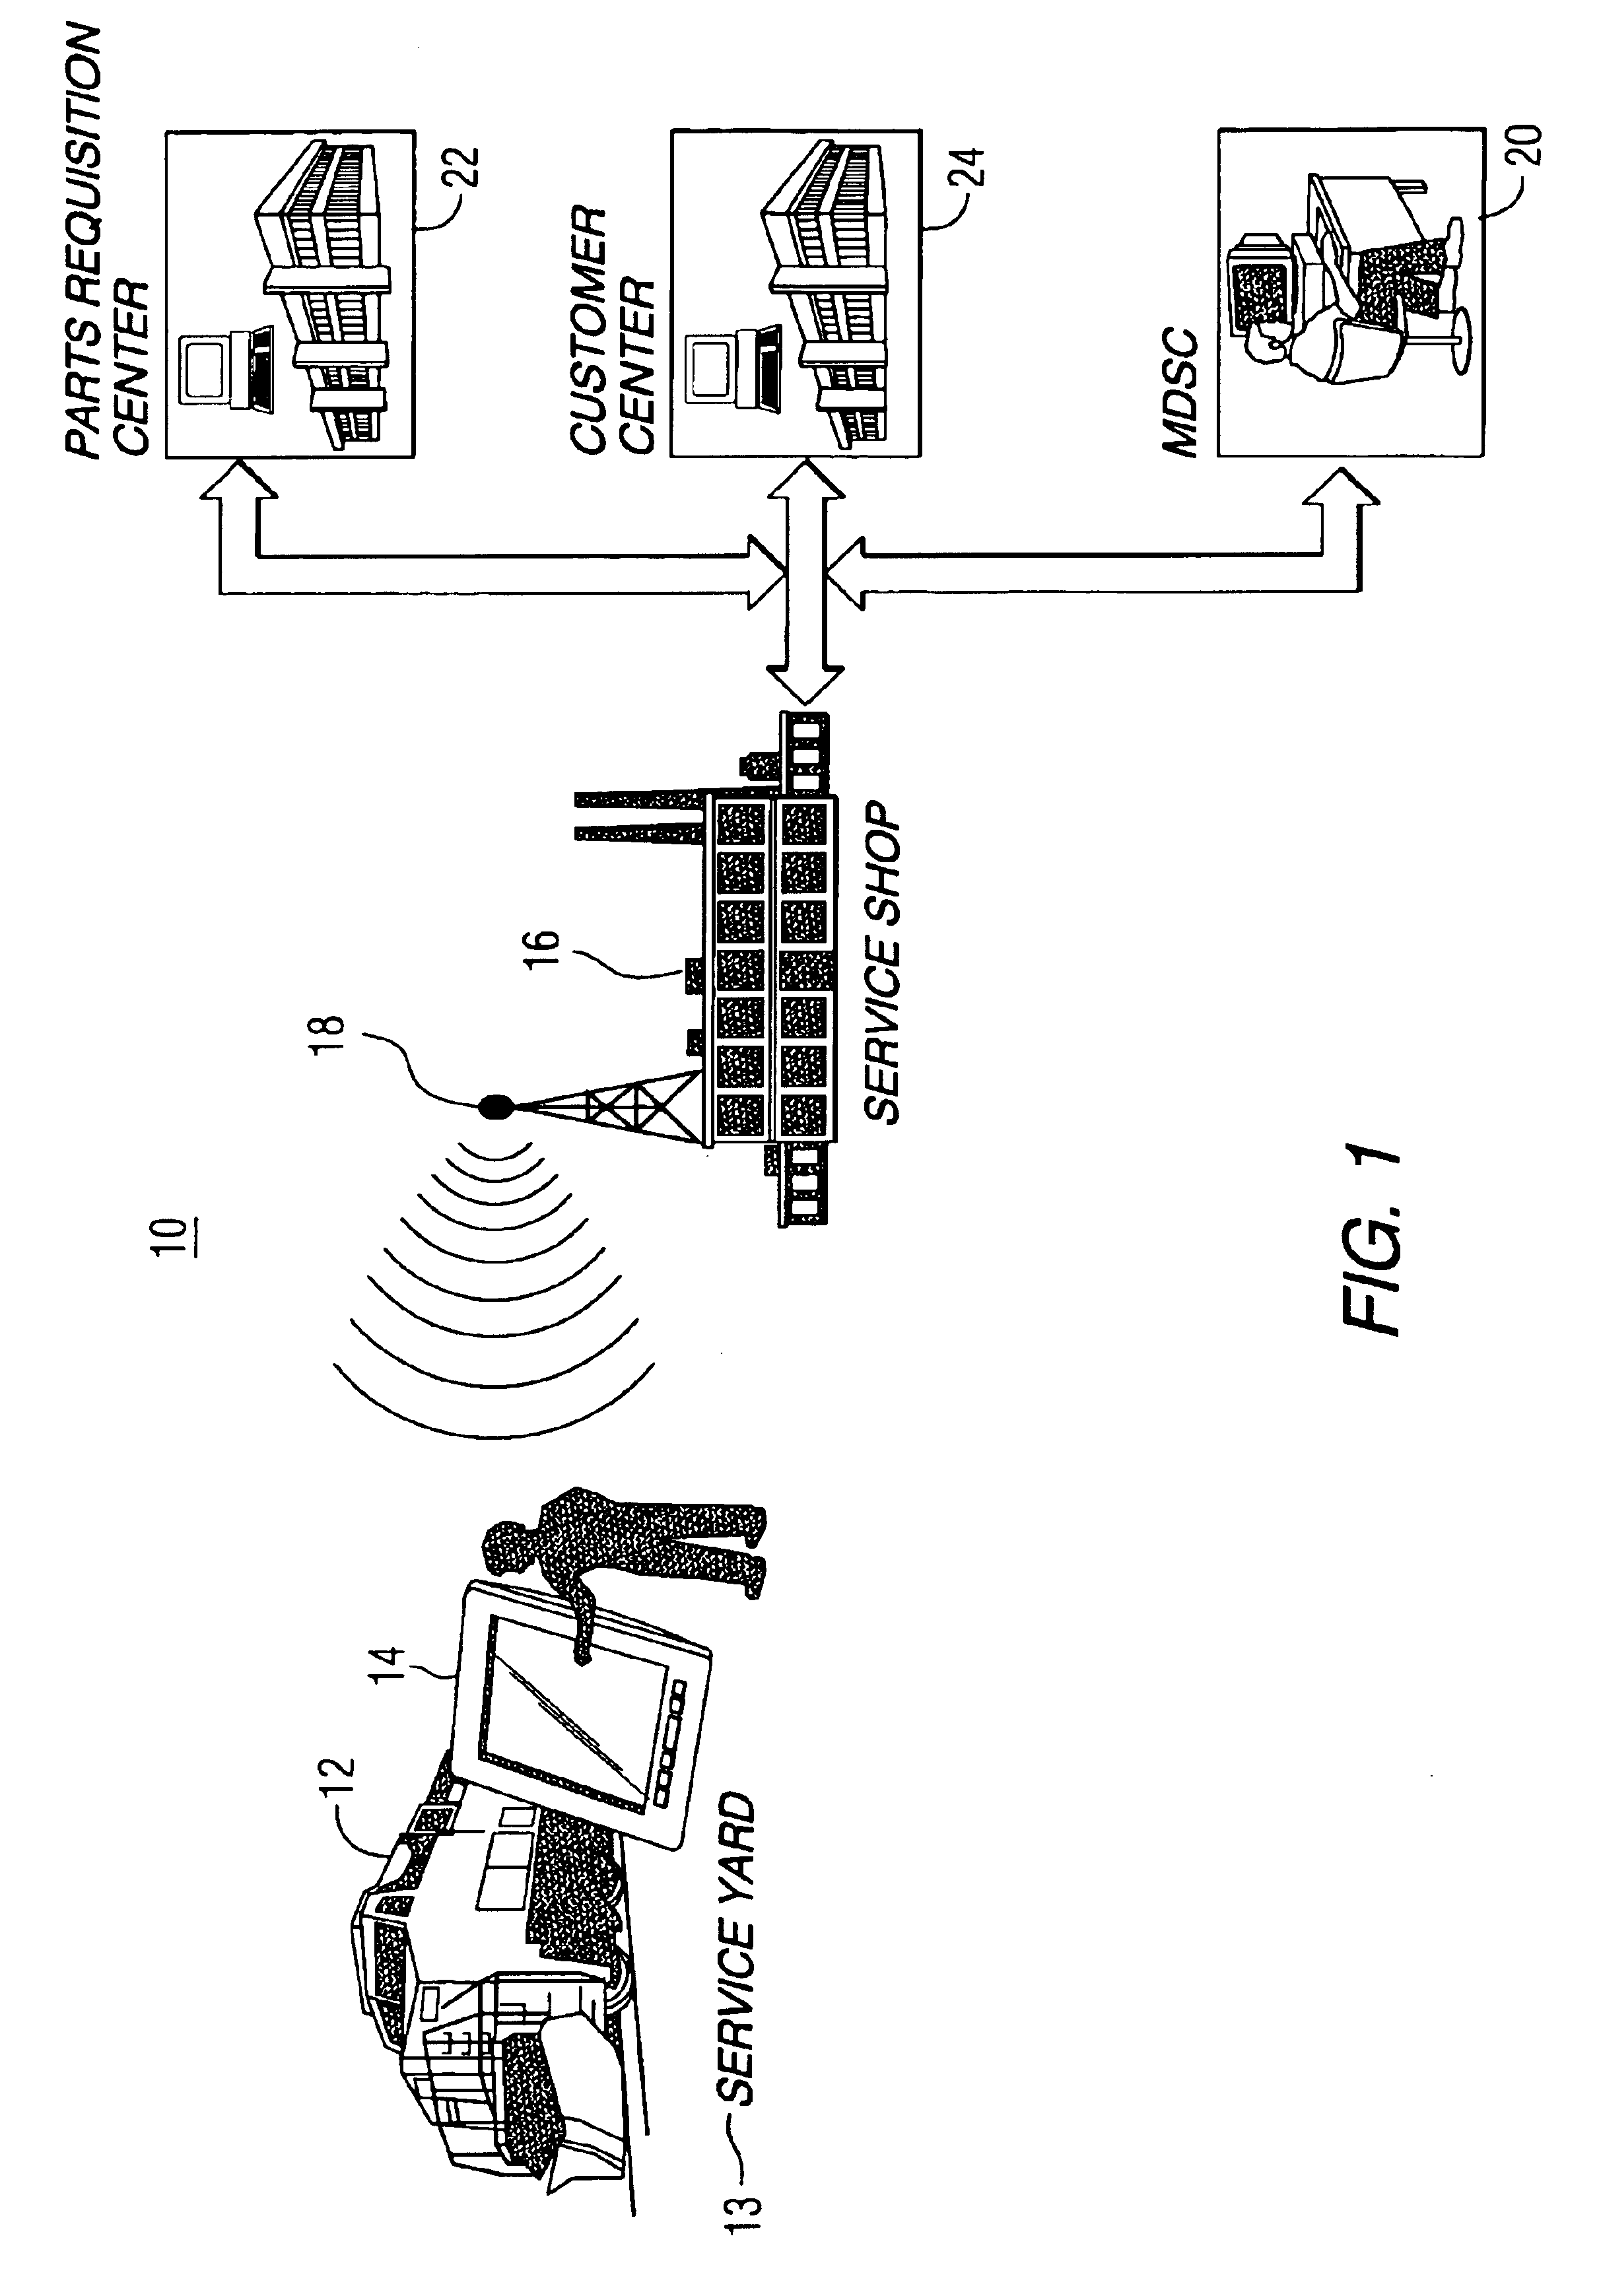 Method for database storing, accessing personnel to service selected assemblies of selected equipment